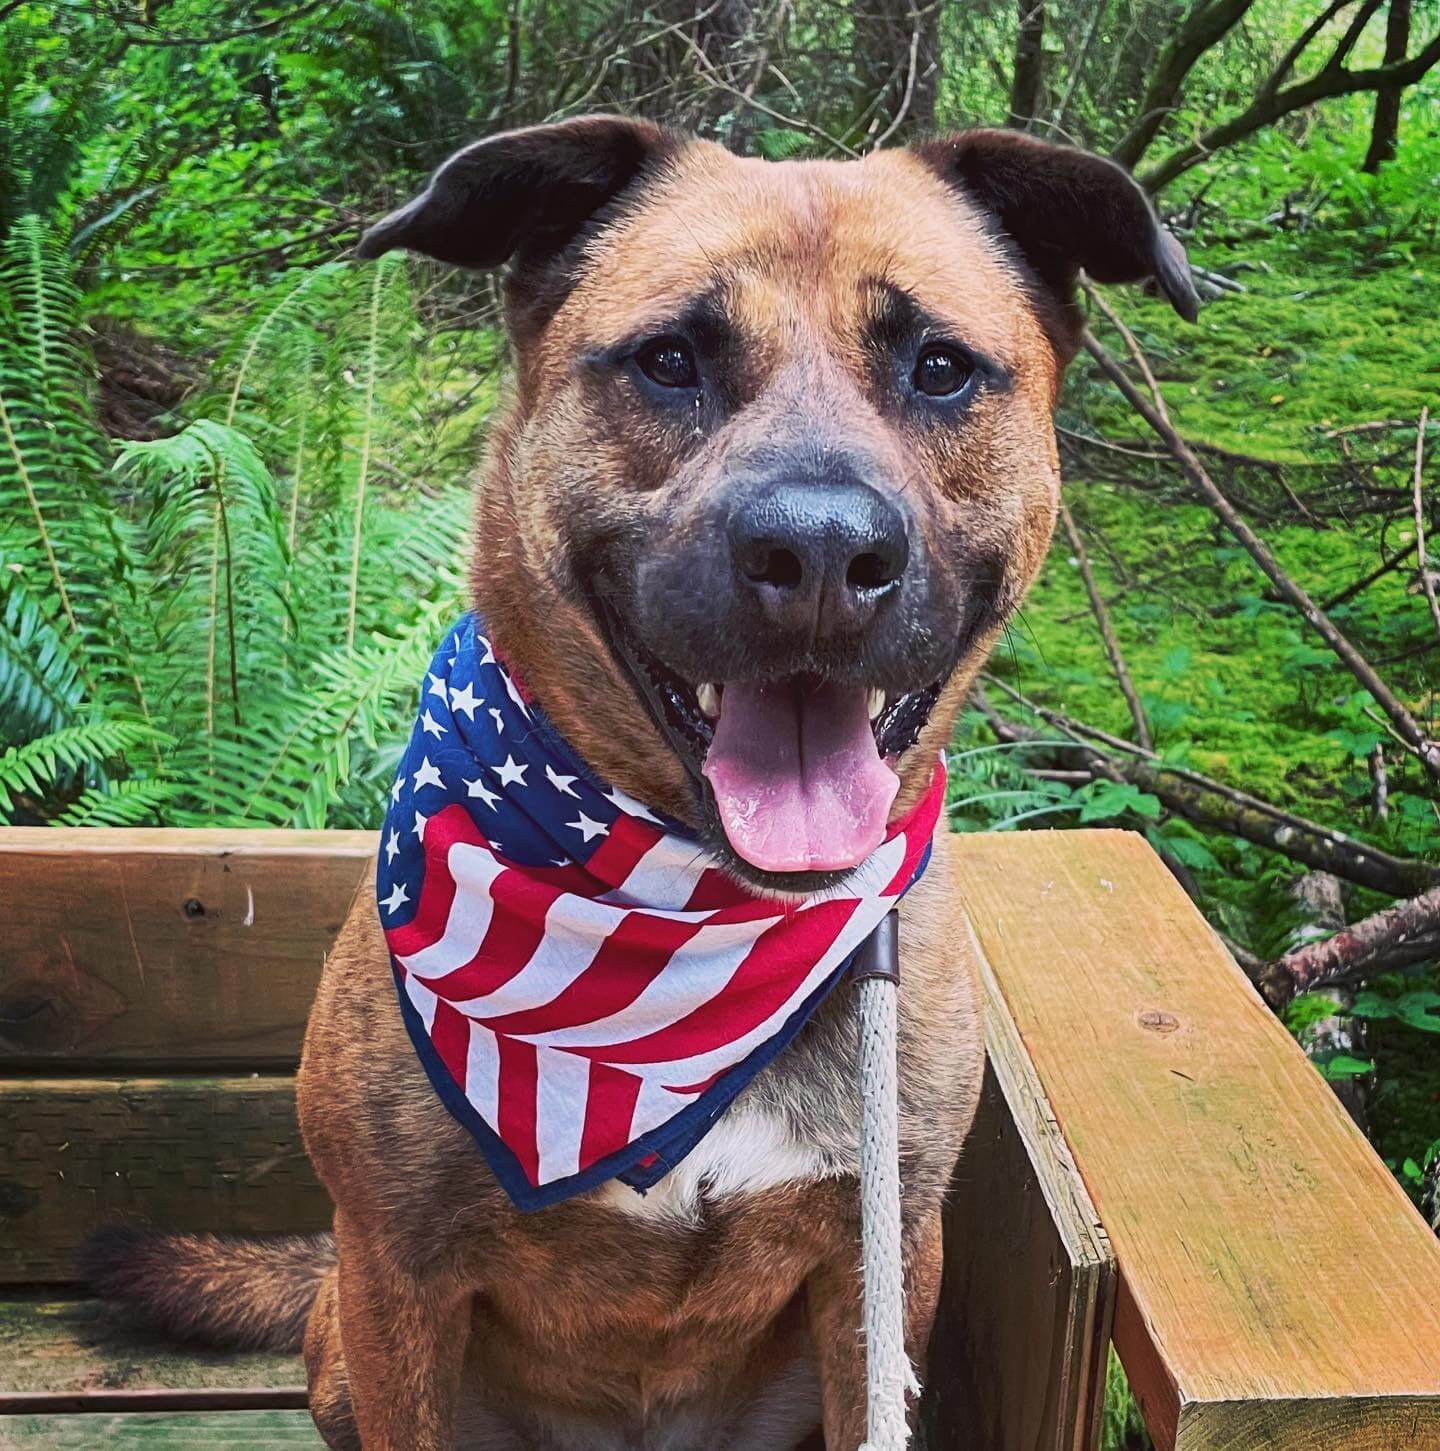 Petey would like to wish everyone a safe and happy Independence Day!  🇺🇸

Please remember to provide your pets a calm, quiet and secure space during the festivities, and make sure they are wearing current identification in case they do get startled by the fireworks. 💗

Pet meet and greets are by appointment only, so if you’d like to meet Petey or any of his friends, submit an application in advance by going to the shelter’s Adopting a Pet page. Scroll to the bottom of the page for the application. Be sure to date it next to the signature line (applications are reviewed in the order they are received) and put the name of the animal you are interested in at the top. You can then save the application to your computer and email it to ac@co.clatsop.or.us or deliver it directly to the shelter. Application forms are also available on the front door of the shelter and can be filled out and turned in on the spot. A shelter staff member will review the app and call you to set up an appointment.
#adoptdontshop #astoriaoregon #seasideoregon #cannonbeachoregon #pnw #pnwonderland #oregoncoast #giveback #volunteer #clatsopcounty #clatsopcountyanimalshelter #sheltercat #shelterdog #clatsopanimalassistance